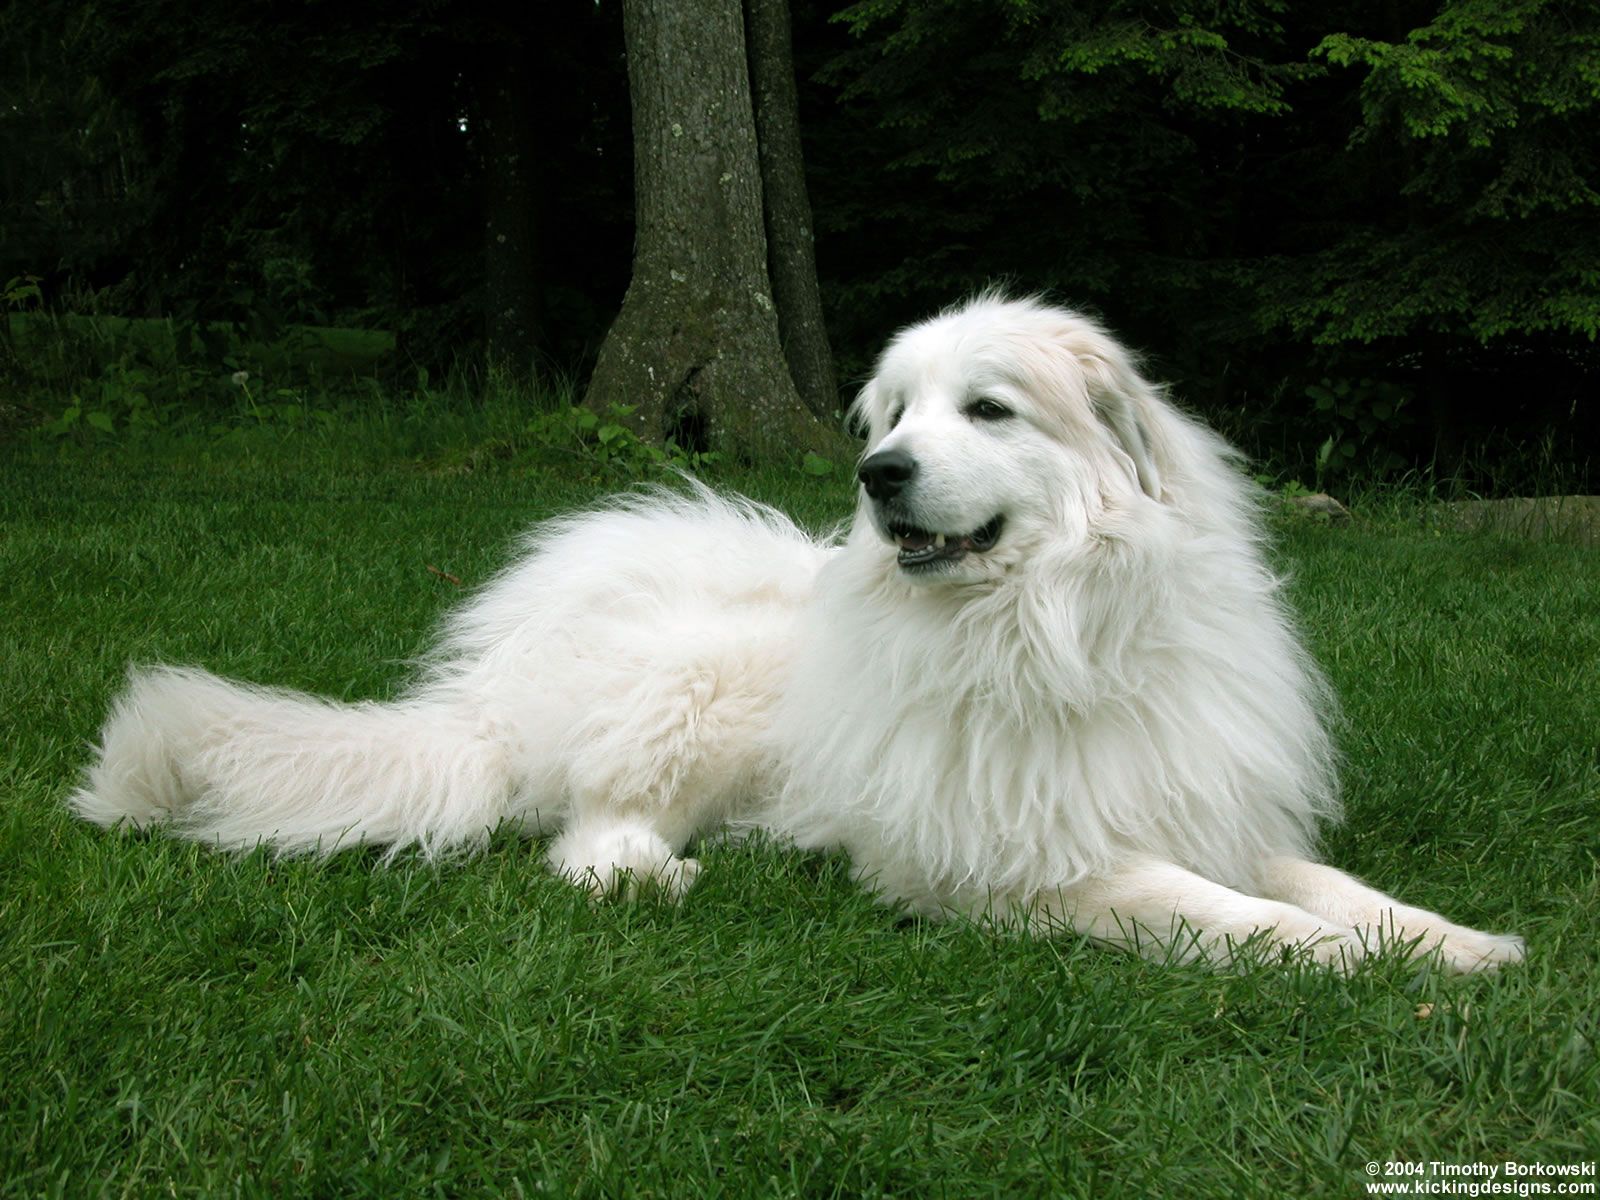 Great Pyrenees Background. Great Pyrenees Wallpaper, Great Pyrenees Background and Pyrenees Tour De France Wallpaper